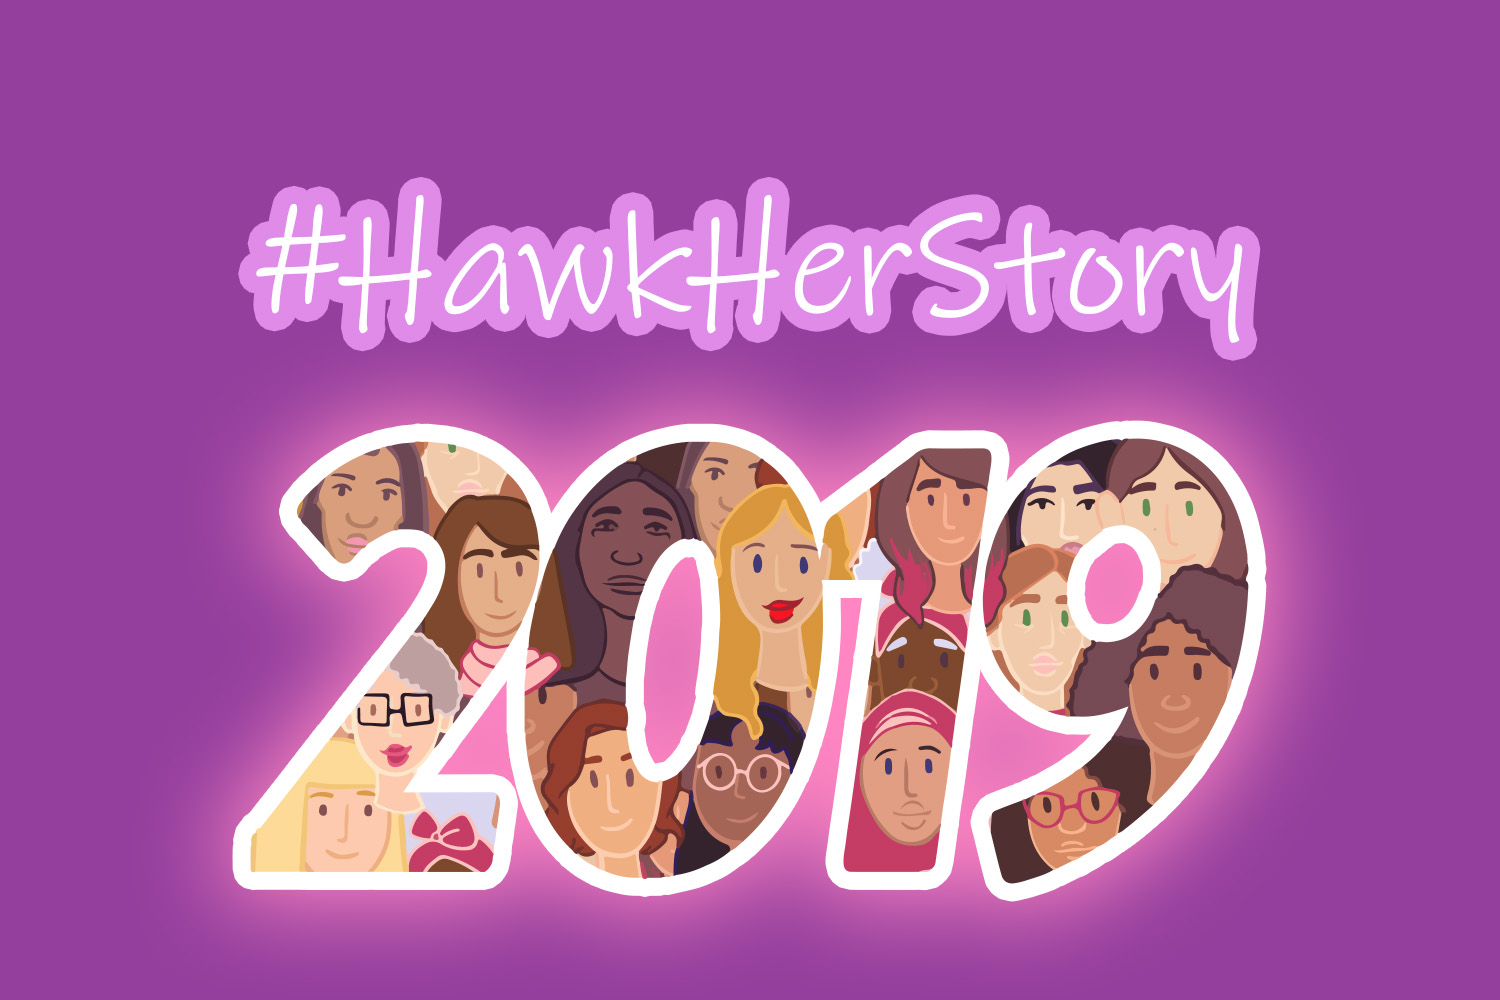 GRAPHIC: Image with the words "#HawkHerStory 2019." The number 2019 is filled with different women. Many are modeled after women of the UHCL community we reached out for interviews as part of the #HawkHerStory campaign. The background is all purple. Graphic created by The Signal Online Editor Alyssa Shotwell.